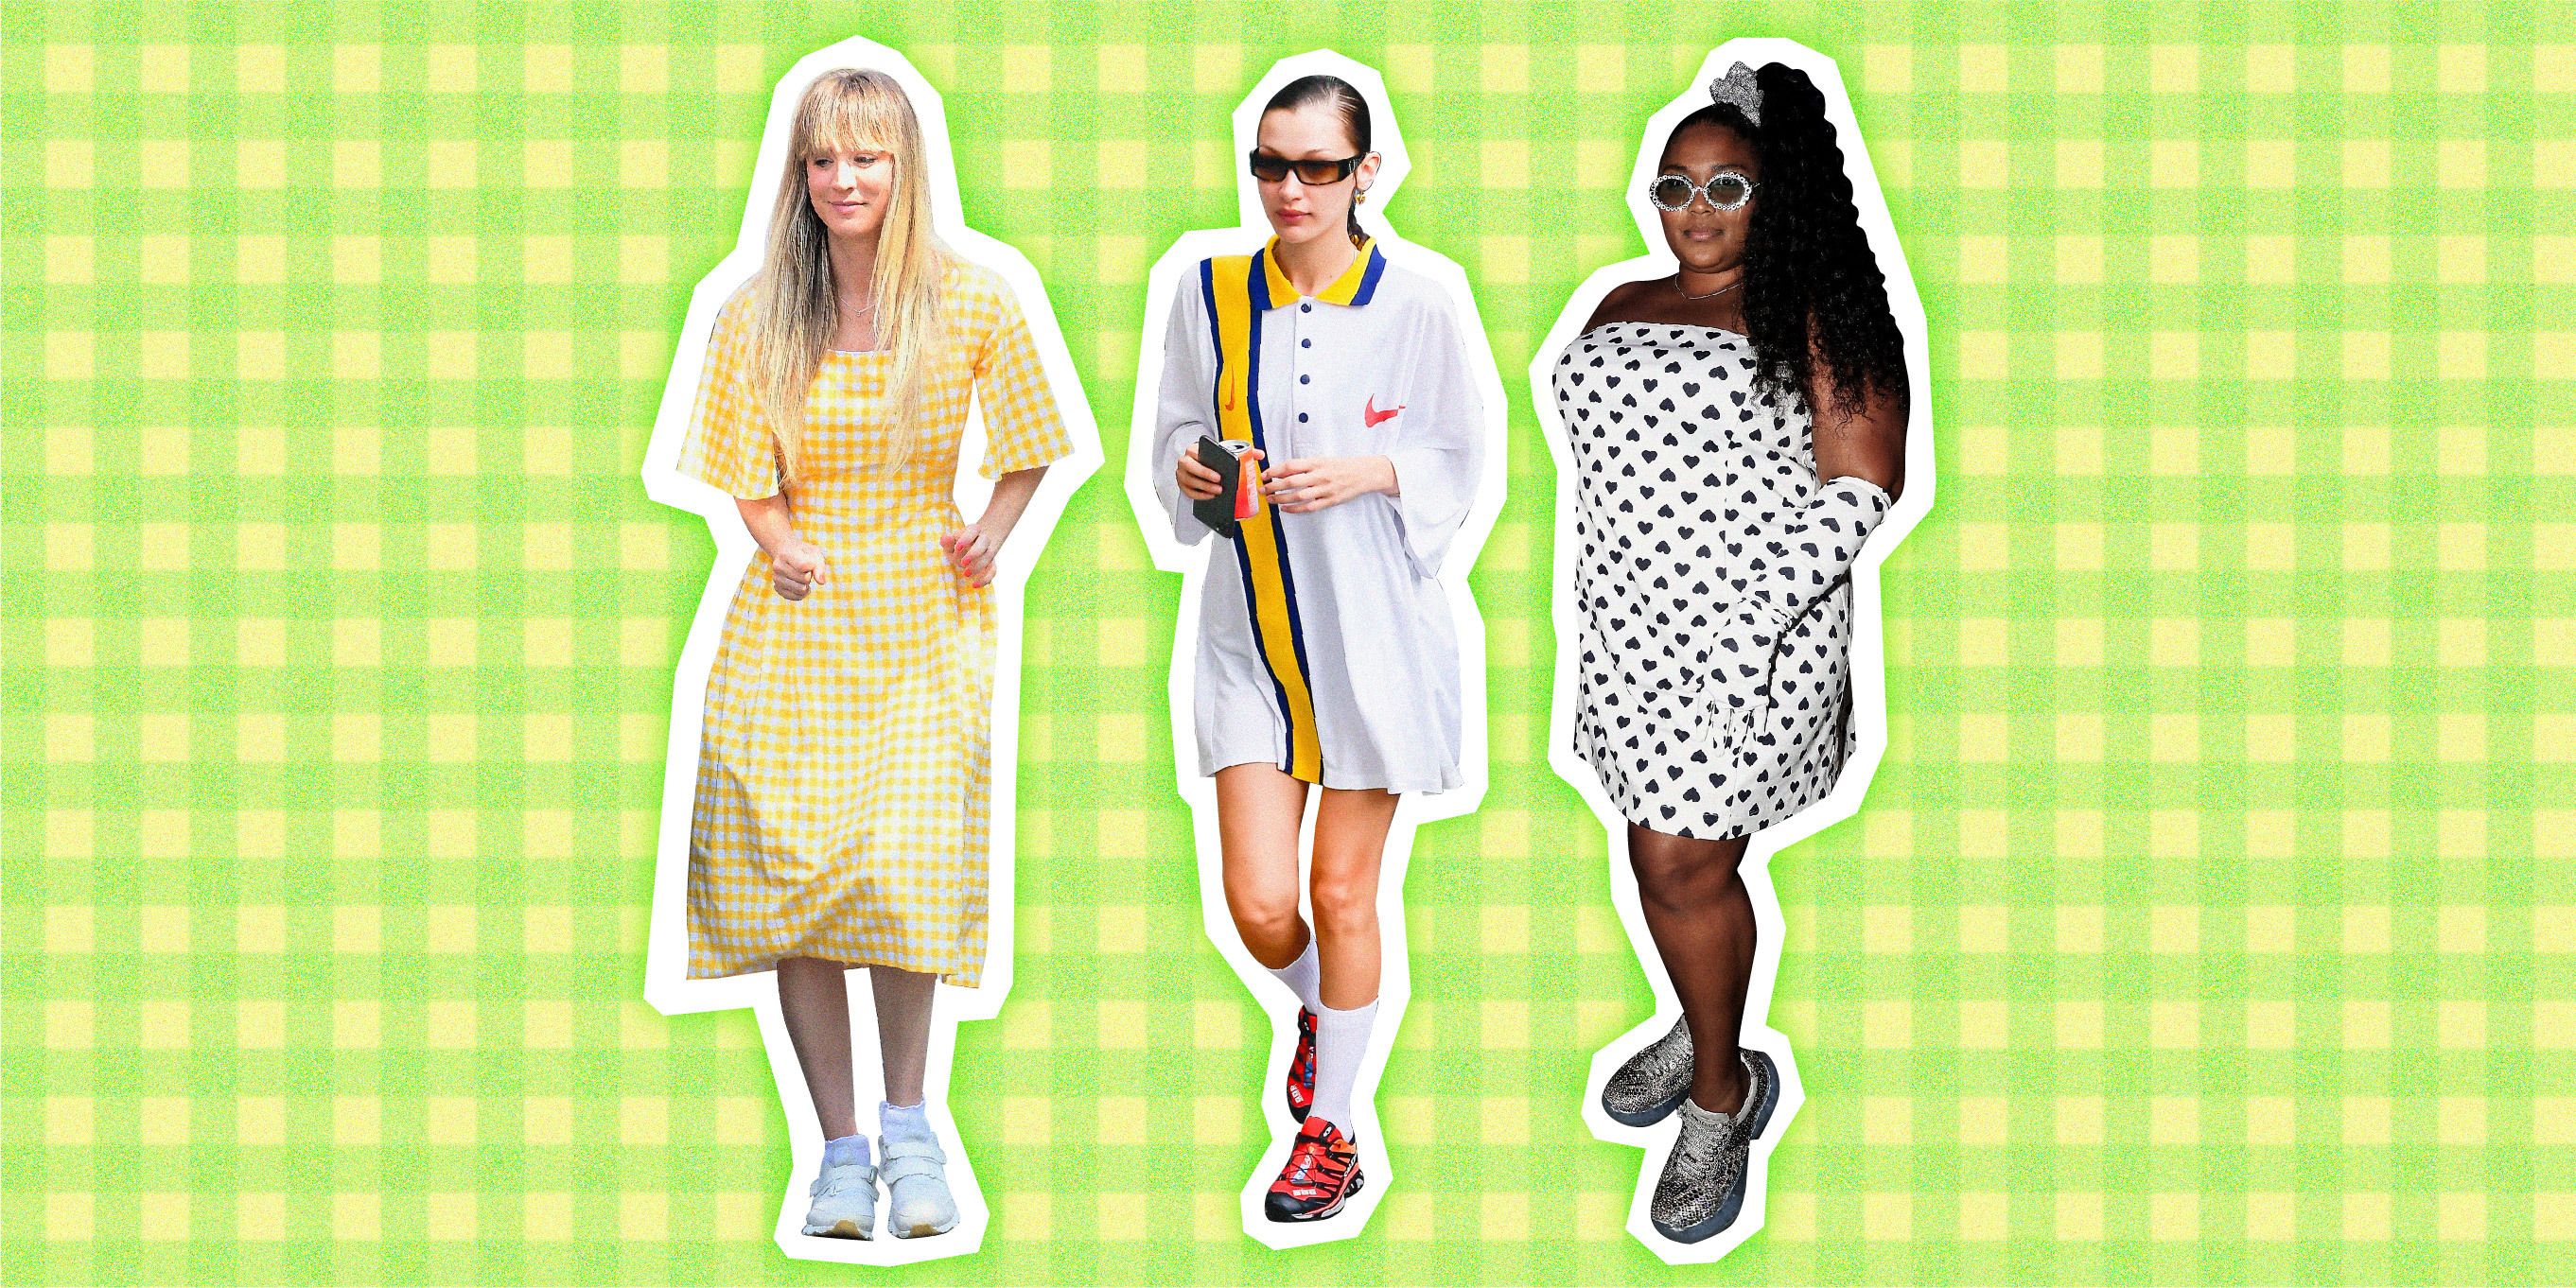 How To Wear A Dress With Sneakers - What To Wear With Sneakers